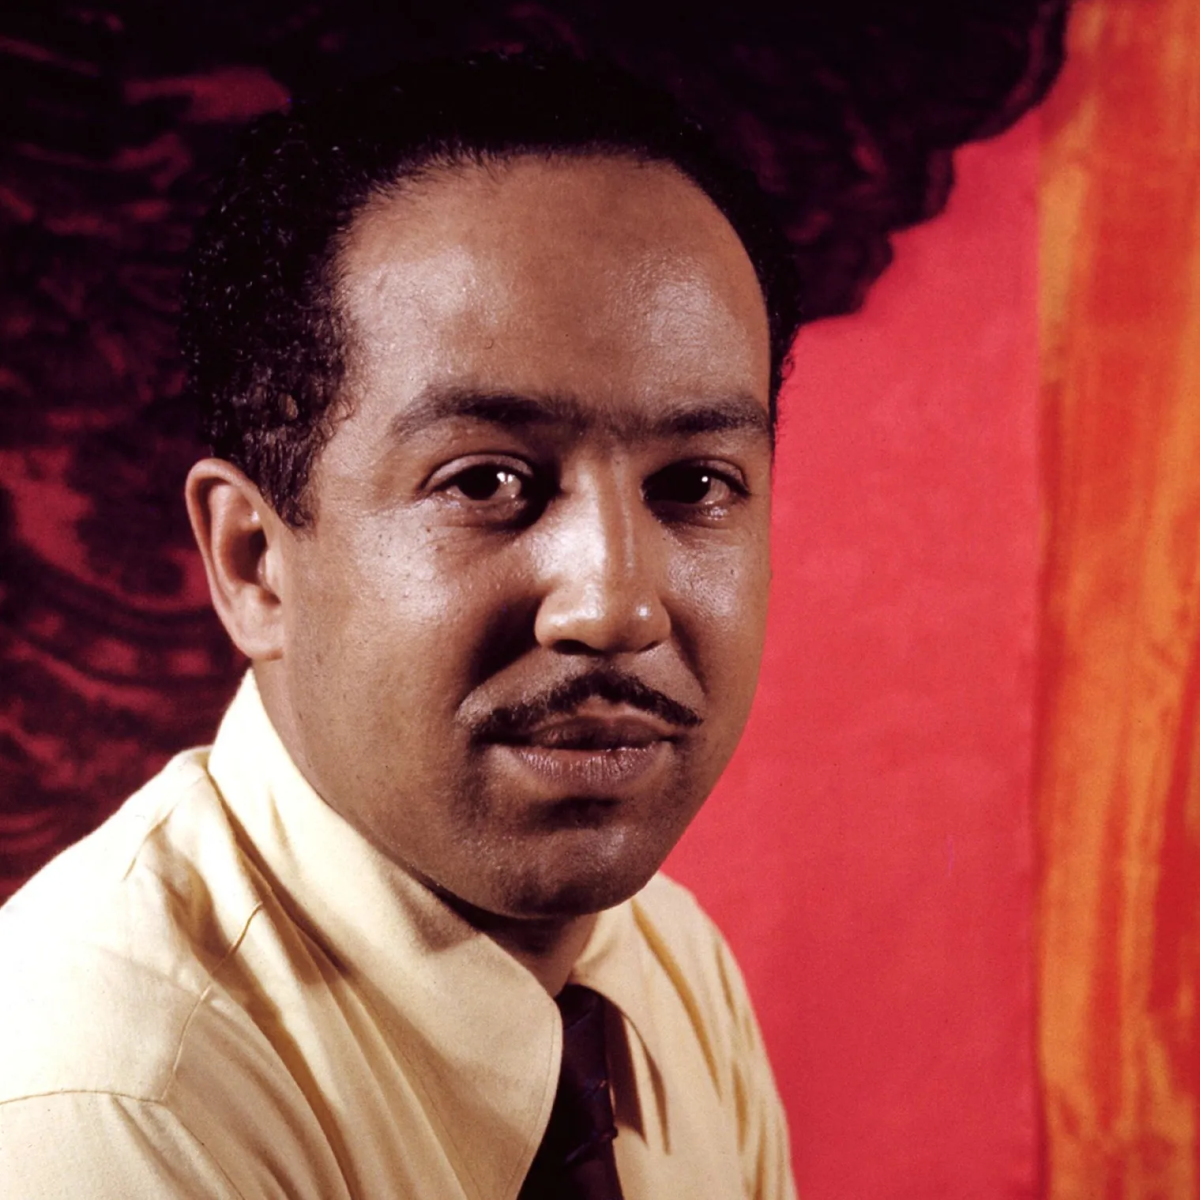 Langston Hughes was an American poet, social activist, novelist, playwright, and columnist. 